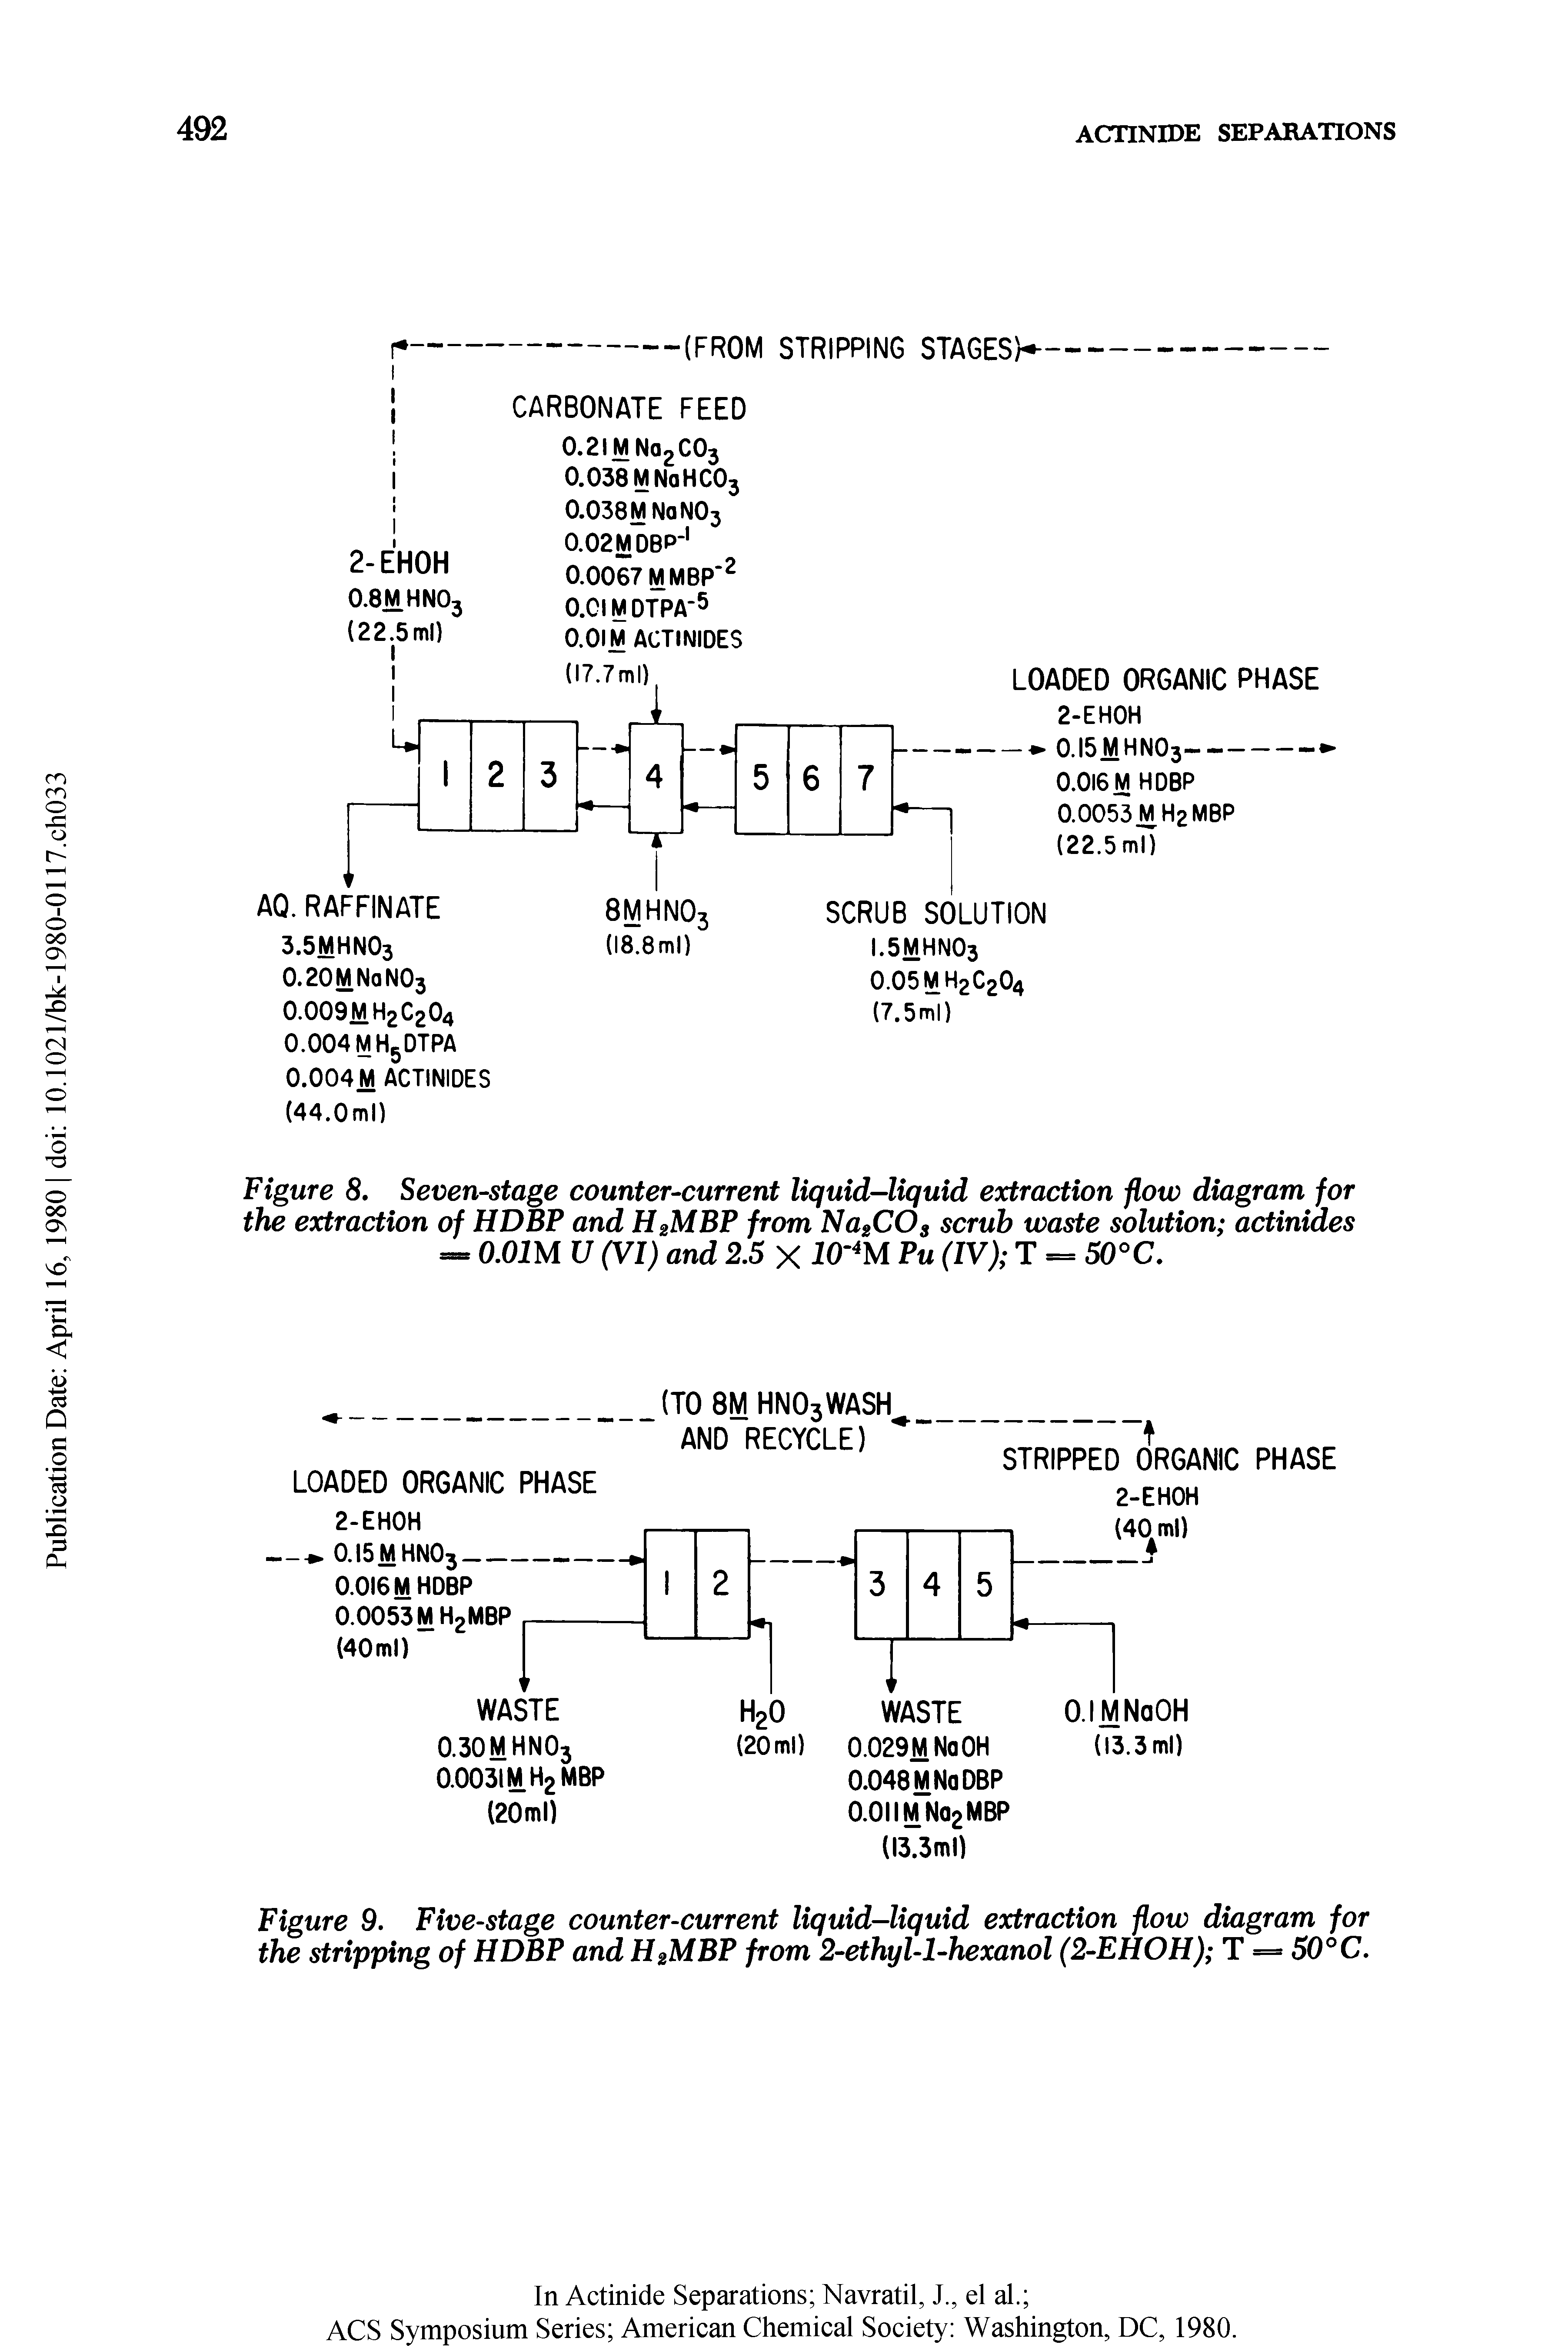 Figure 9. Five-stage counter-current liquid-liquid extraction flow diagram for the stripping of HDBP and H2MBP from 2-ethyl-l-hexanol (2-EHOH) T = 50°C.